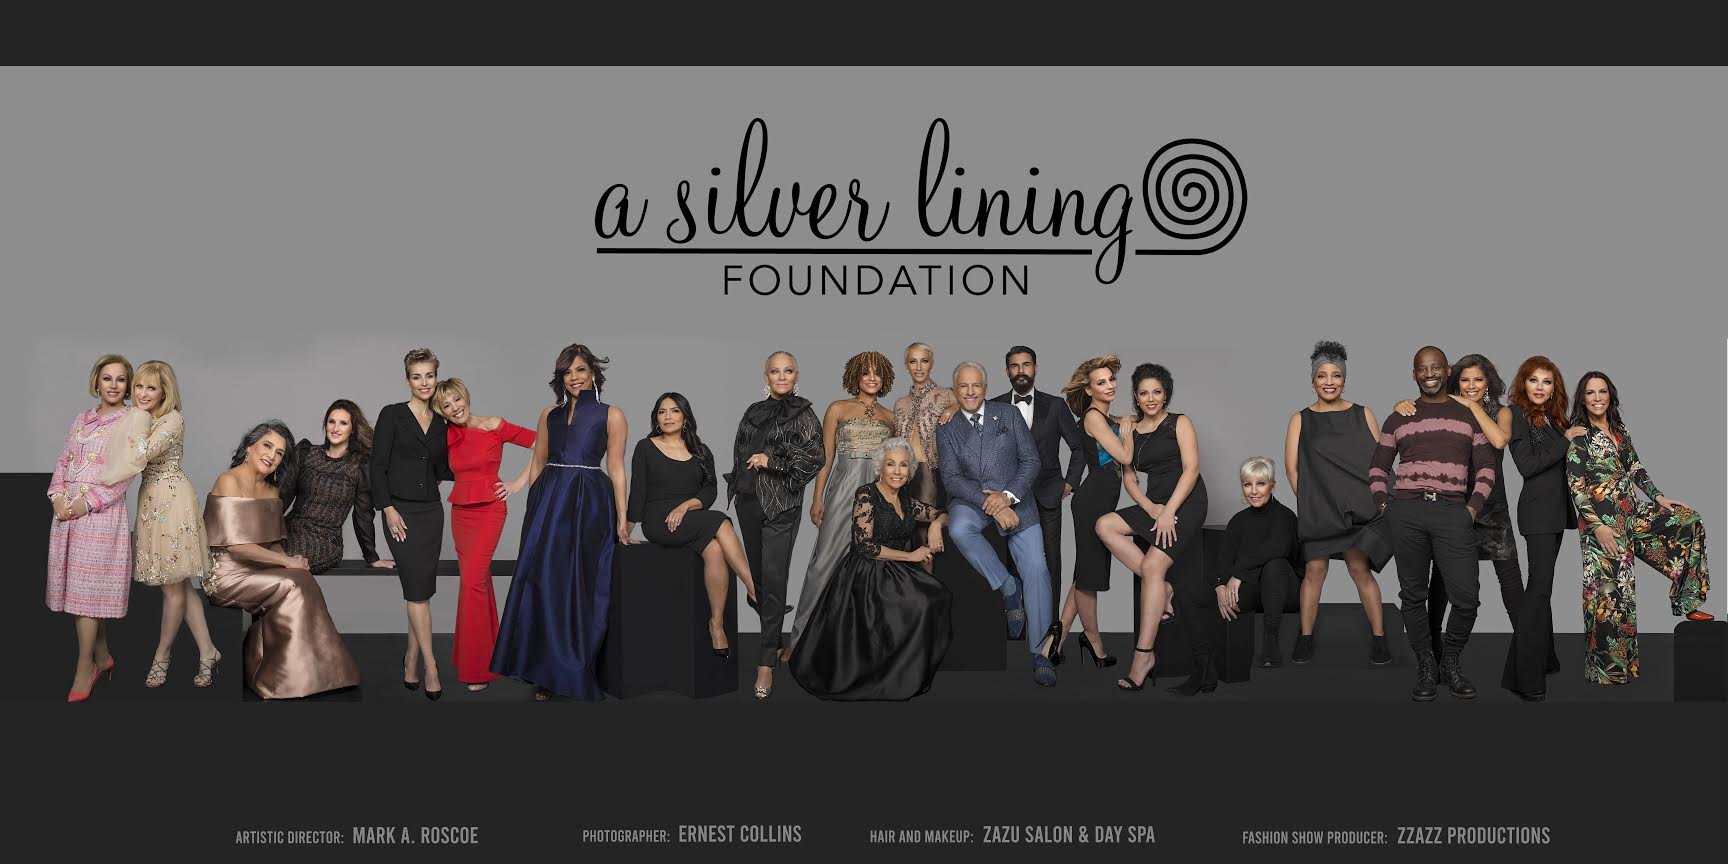 Ernest Collins composed this photo with many Chicago media personalities for a fashion event to benefit A Silver Lining Foundation. Ernest Collins 